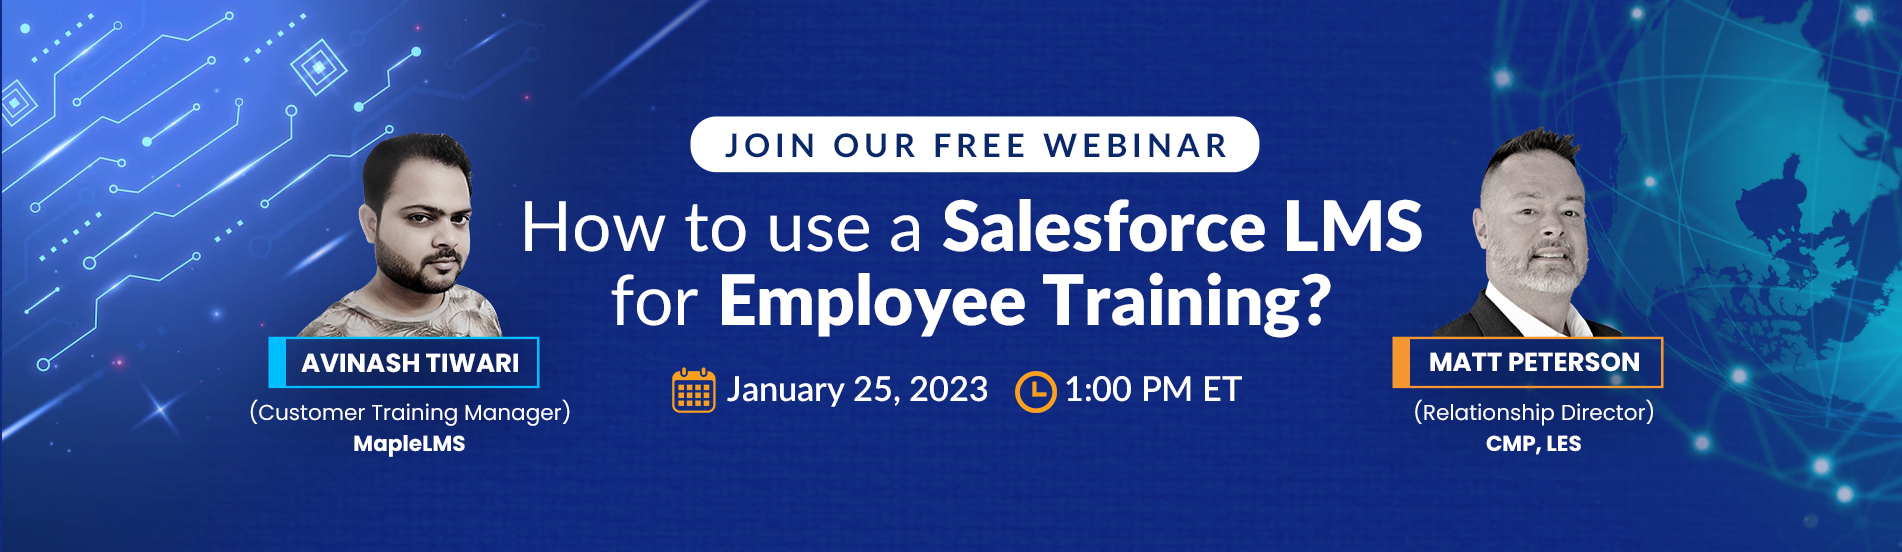 How to use a Salesforce LMS for Employee Training